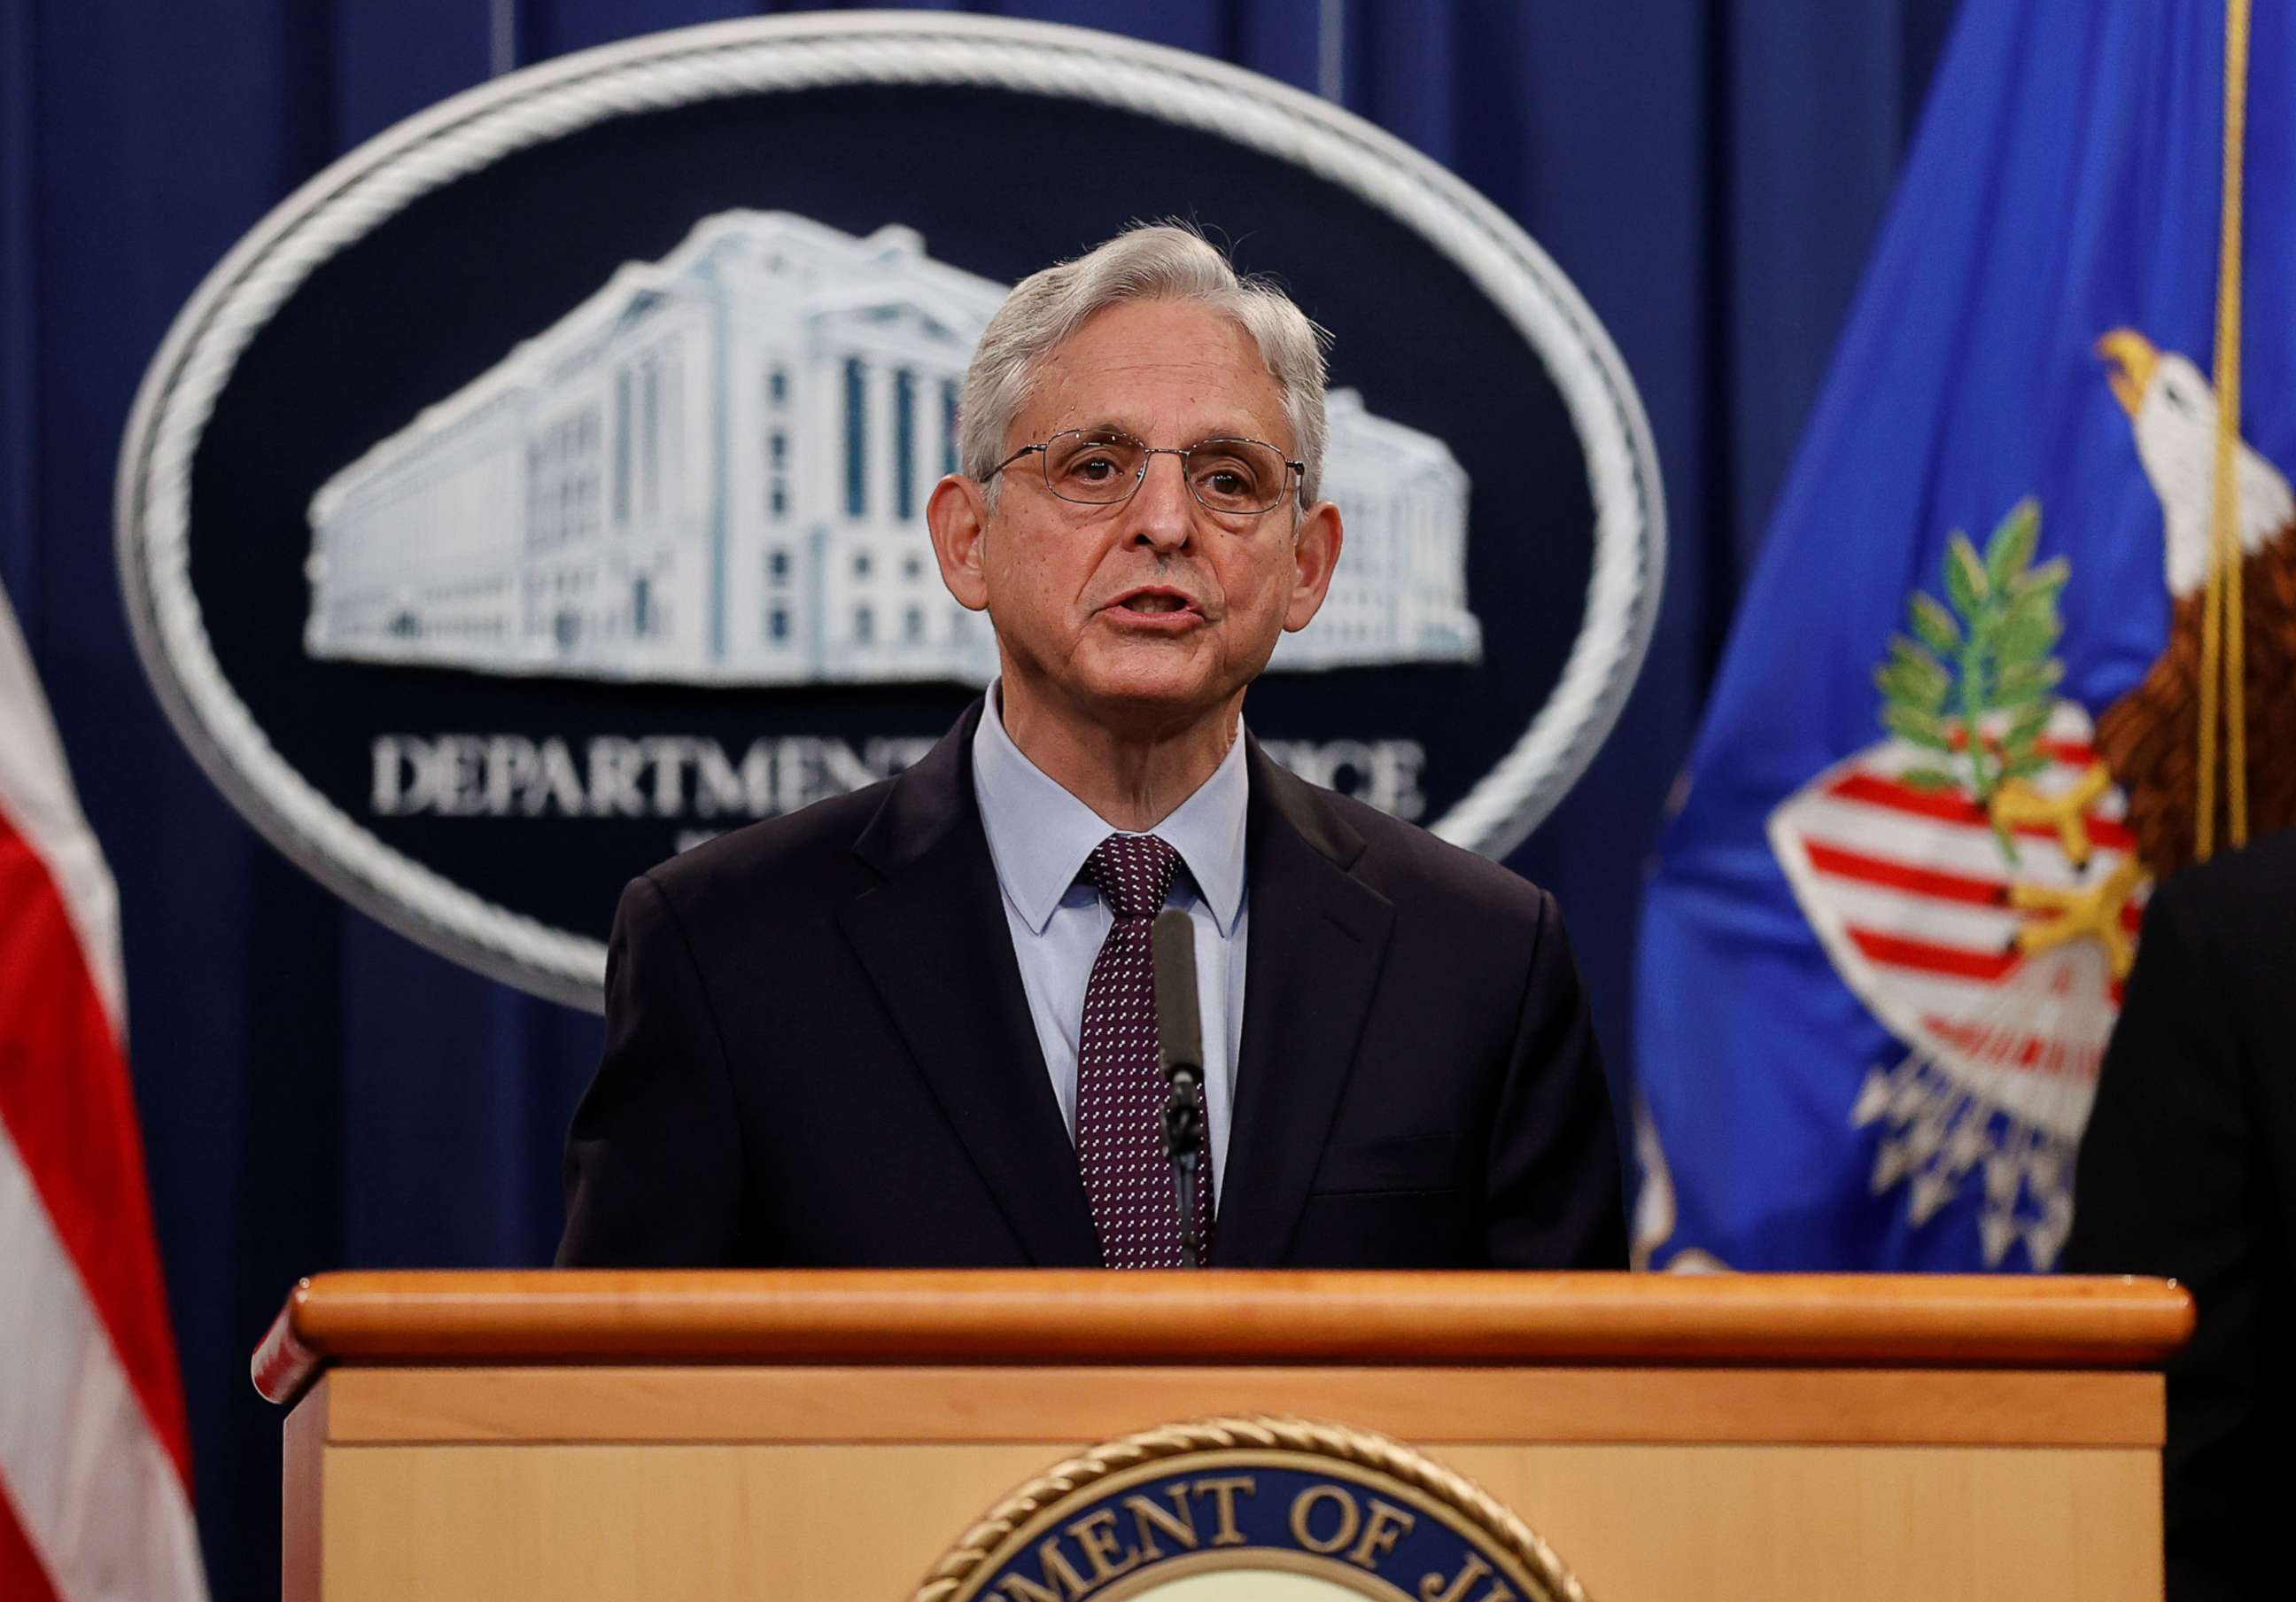 PHOTO: U.S. Attorney General Merrick Garland announces charges against a suspect from Ukraine and a Russian national over a July ransomware attack on an American company, during a news conference in Washington, D.C., Nov. 8, 2021.